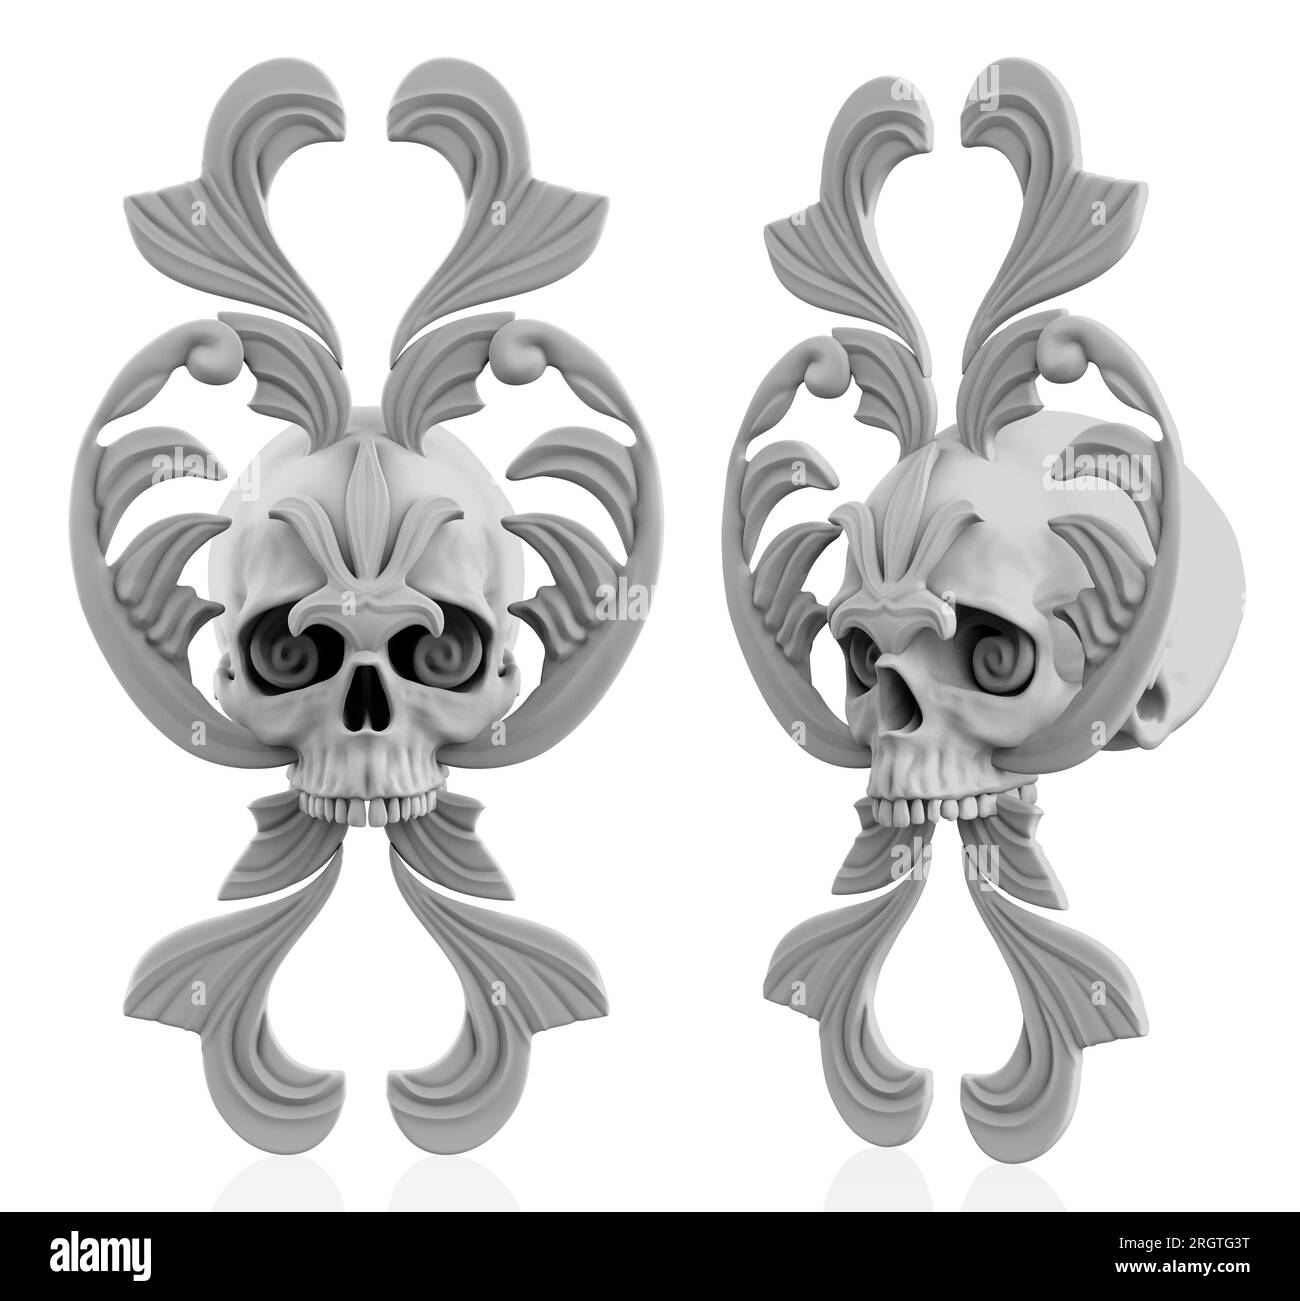 Isolated 3d render illustration of clay gothic baroque ornate skull, gray colored in various angles. Stock Photo